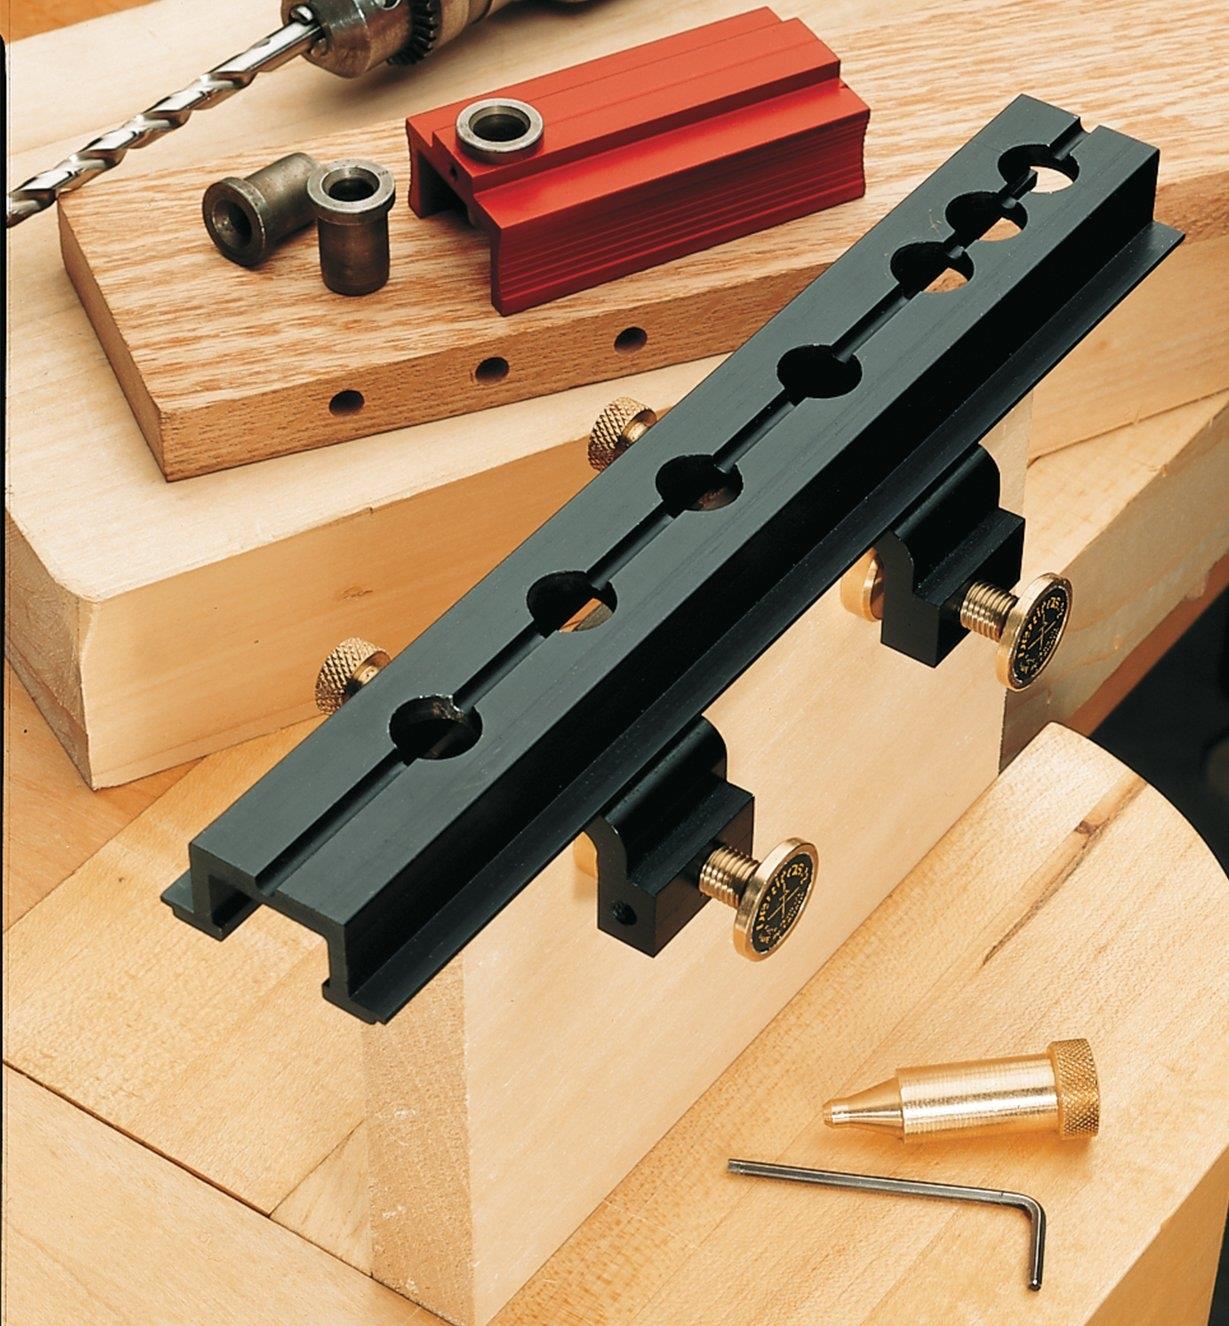 Dowelling jig attached to the end of a board prior to drilling holes